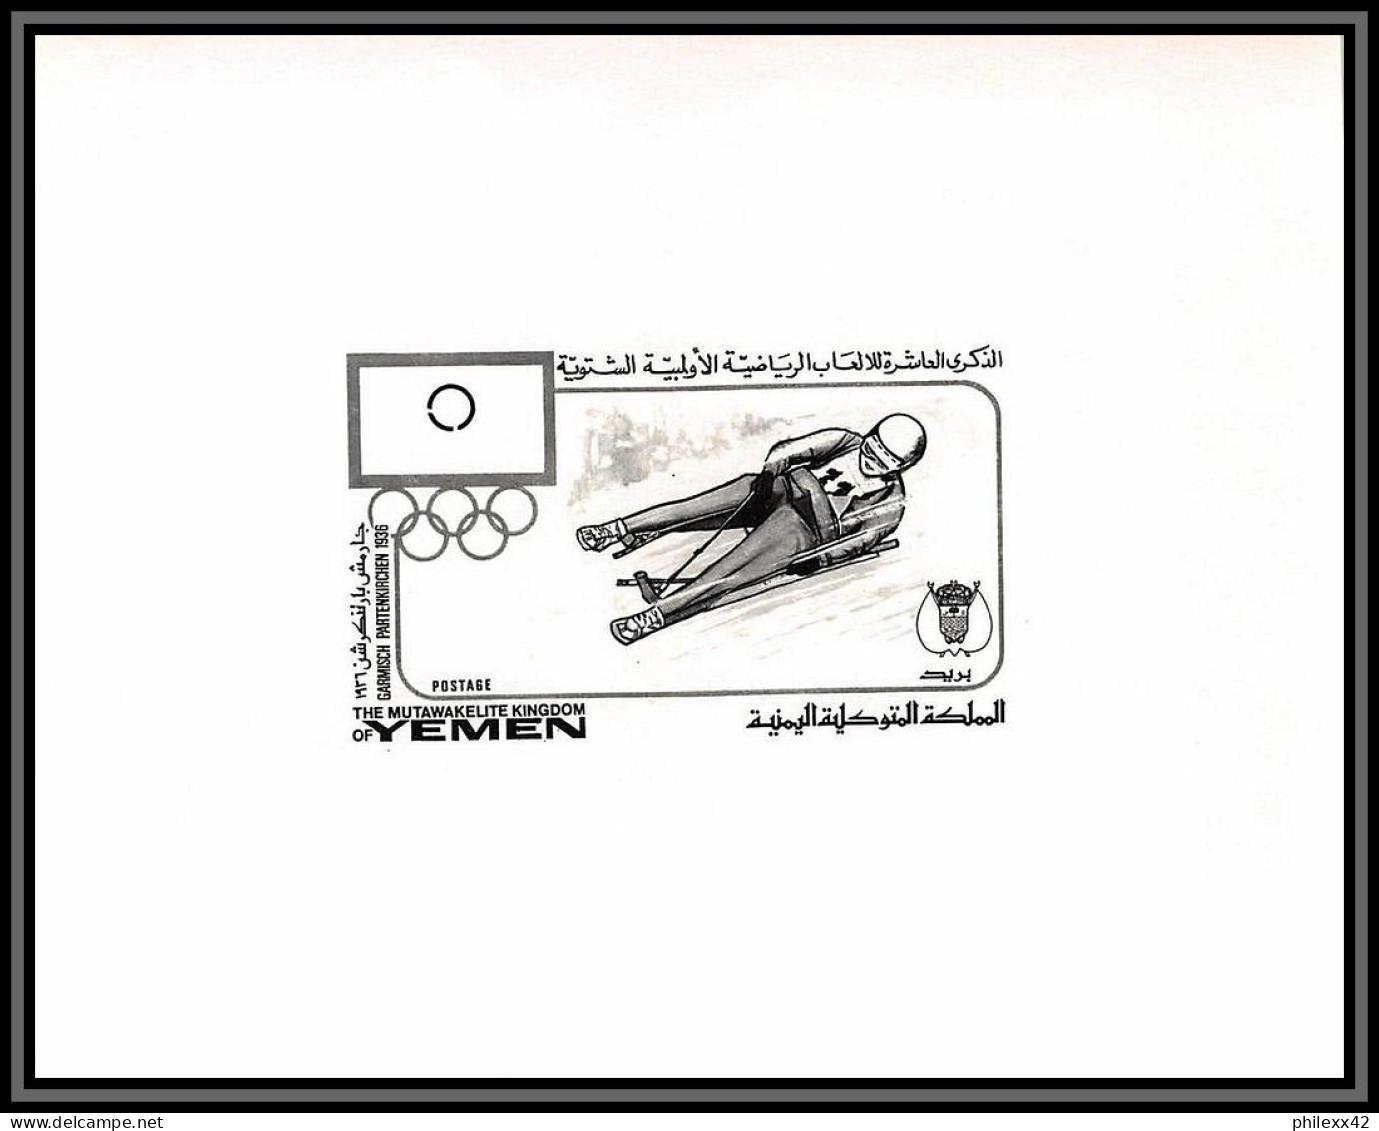 Yemen royaume (kingdom) - 4288 N°532 Bobsleigh deluxe sheets proof jeux olympiques olympic game grenoble 1968 ** MNH